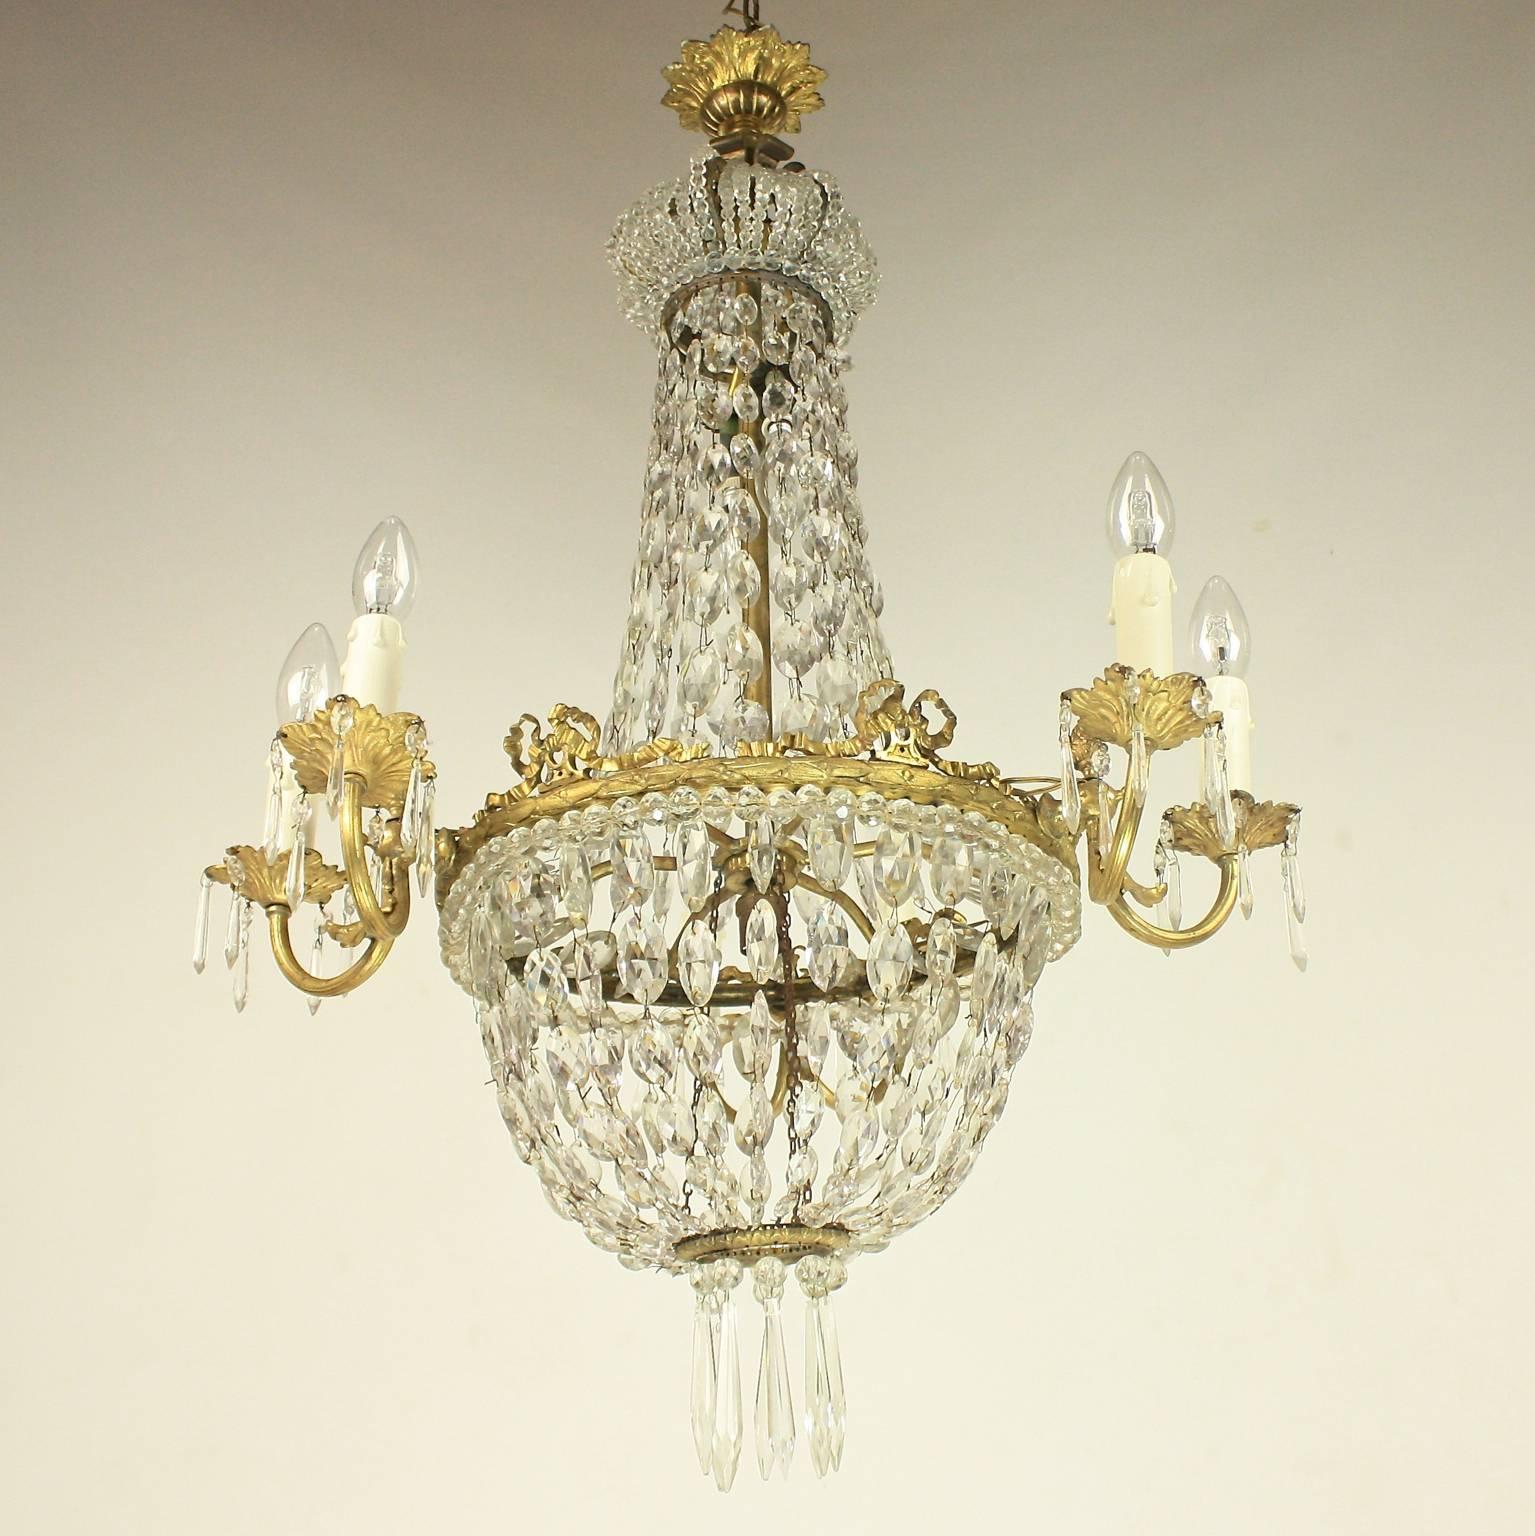 A late 19th century French gilt bronze and cut-crystal basket chandelier with a corona in the form of a crown made of small facetted pearls, hang with chains of crystal drops with a central ring cast and finely chiseled with a laurel and berry